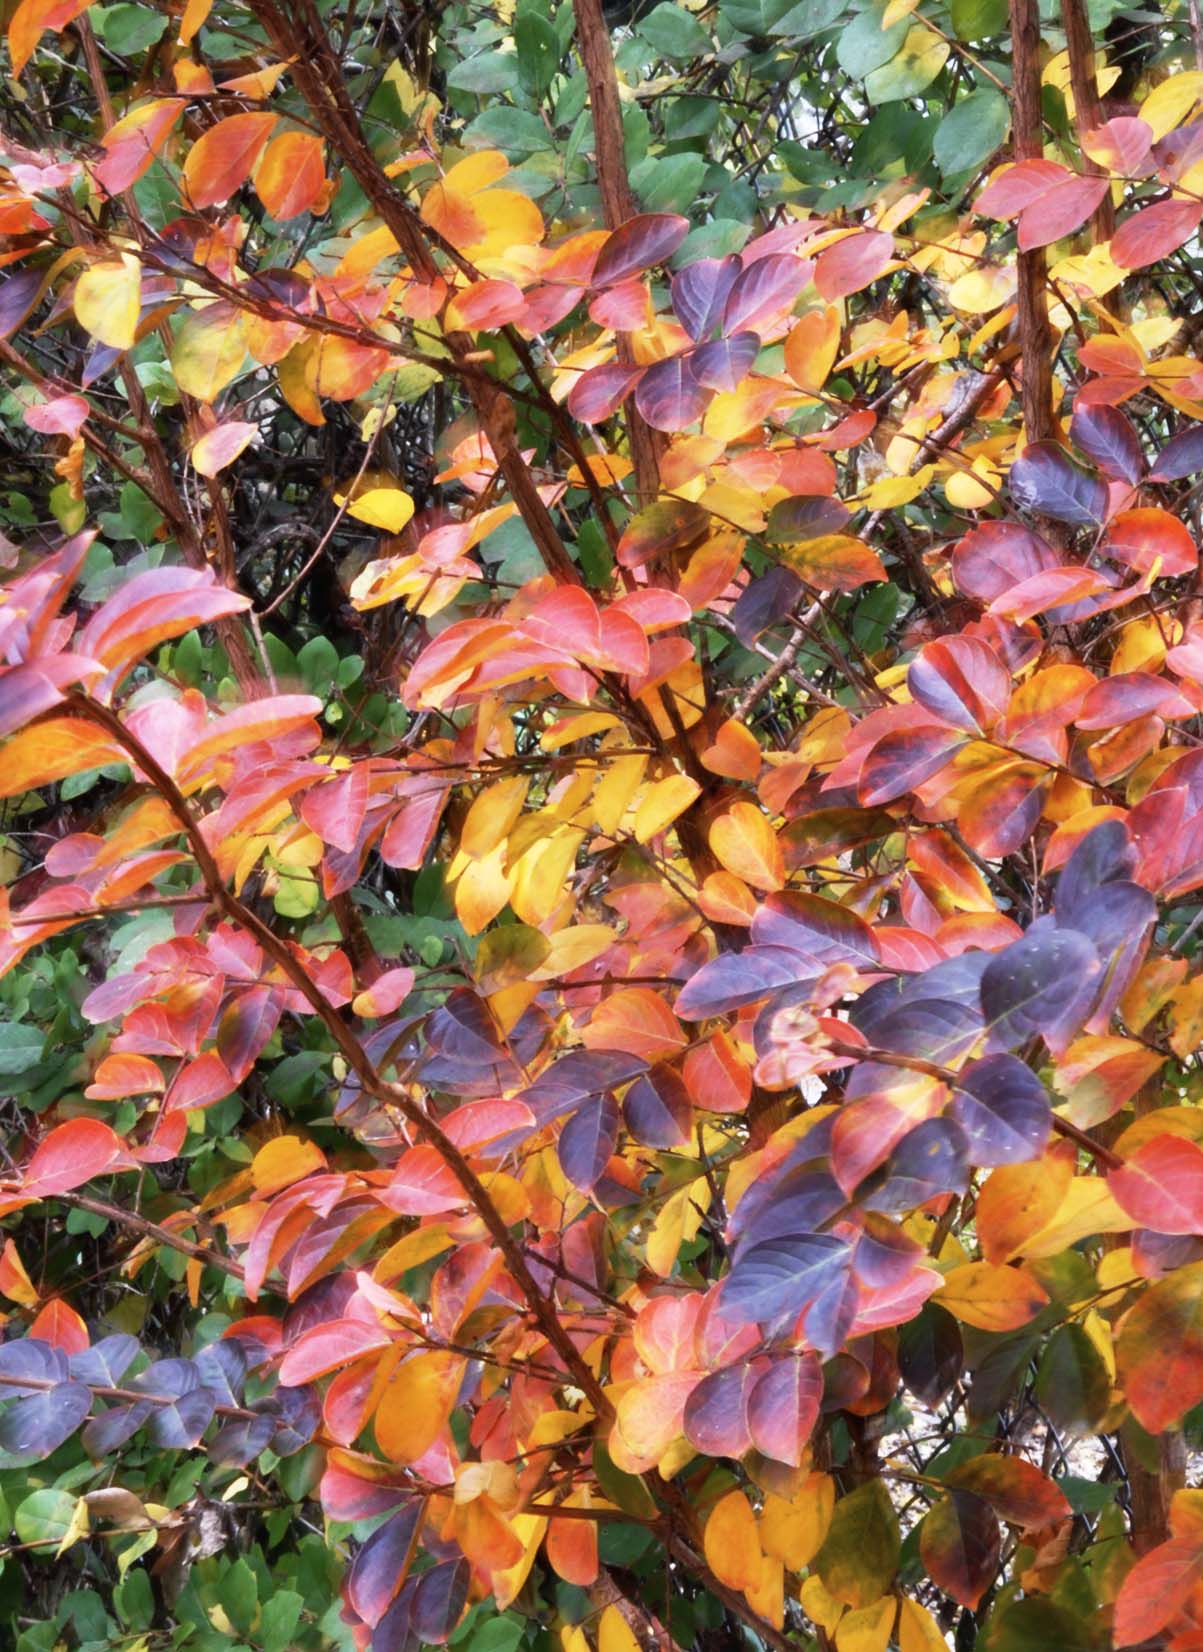 Close-up of yellow, orange, and red tinged foliage on a crepe myrtle tree in autumn